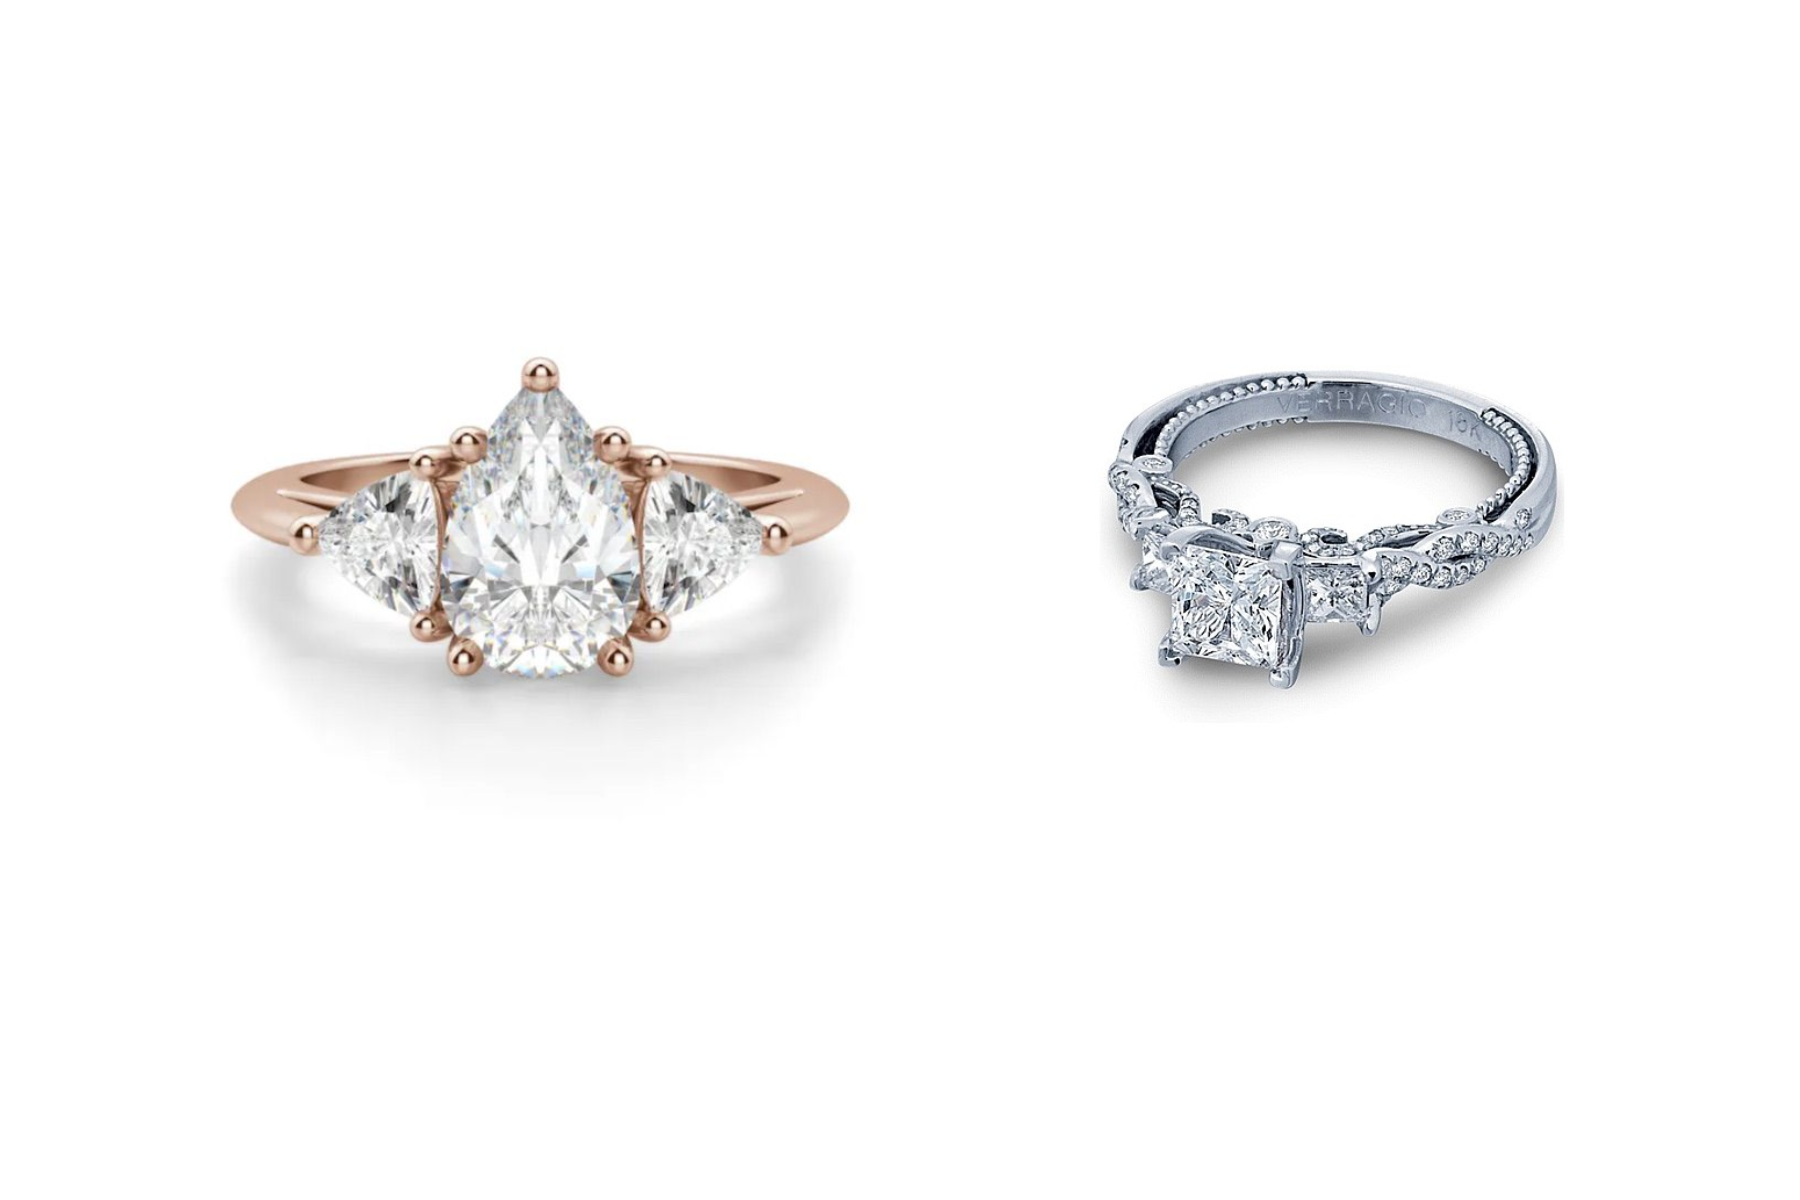 Two variations of three-stone engagement rings with different types of cuts